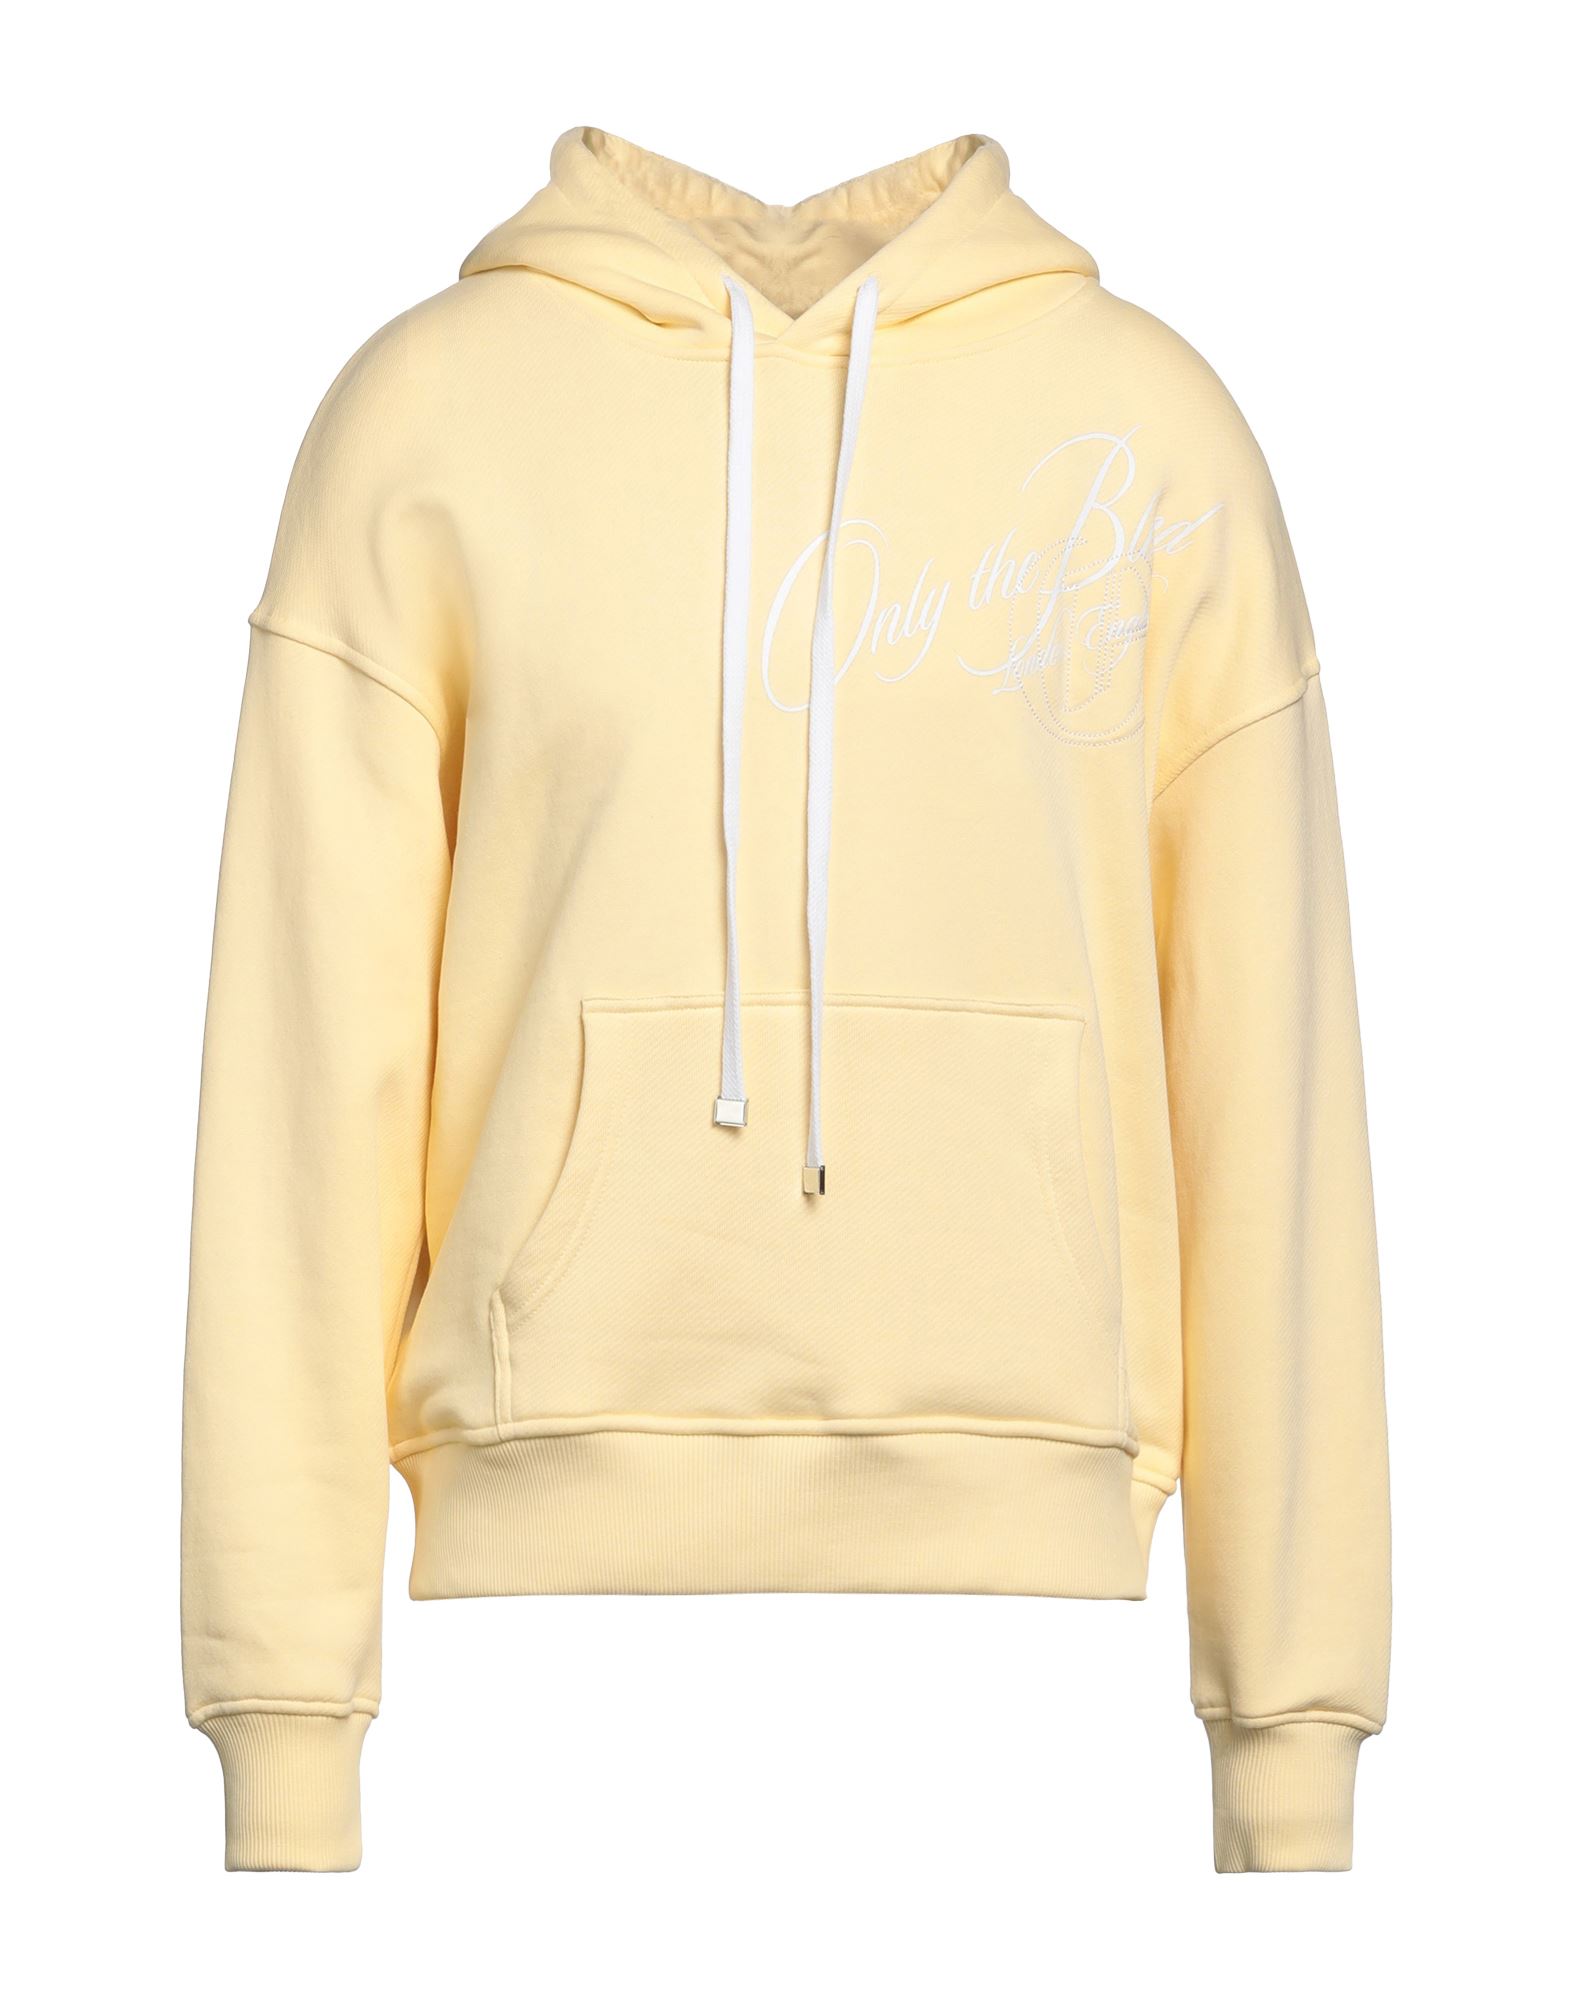 Only The Blind Sweatshirts In Yellow